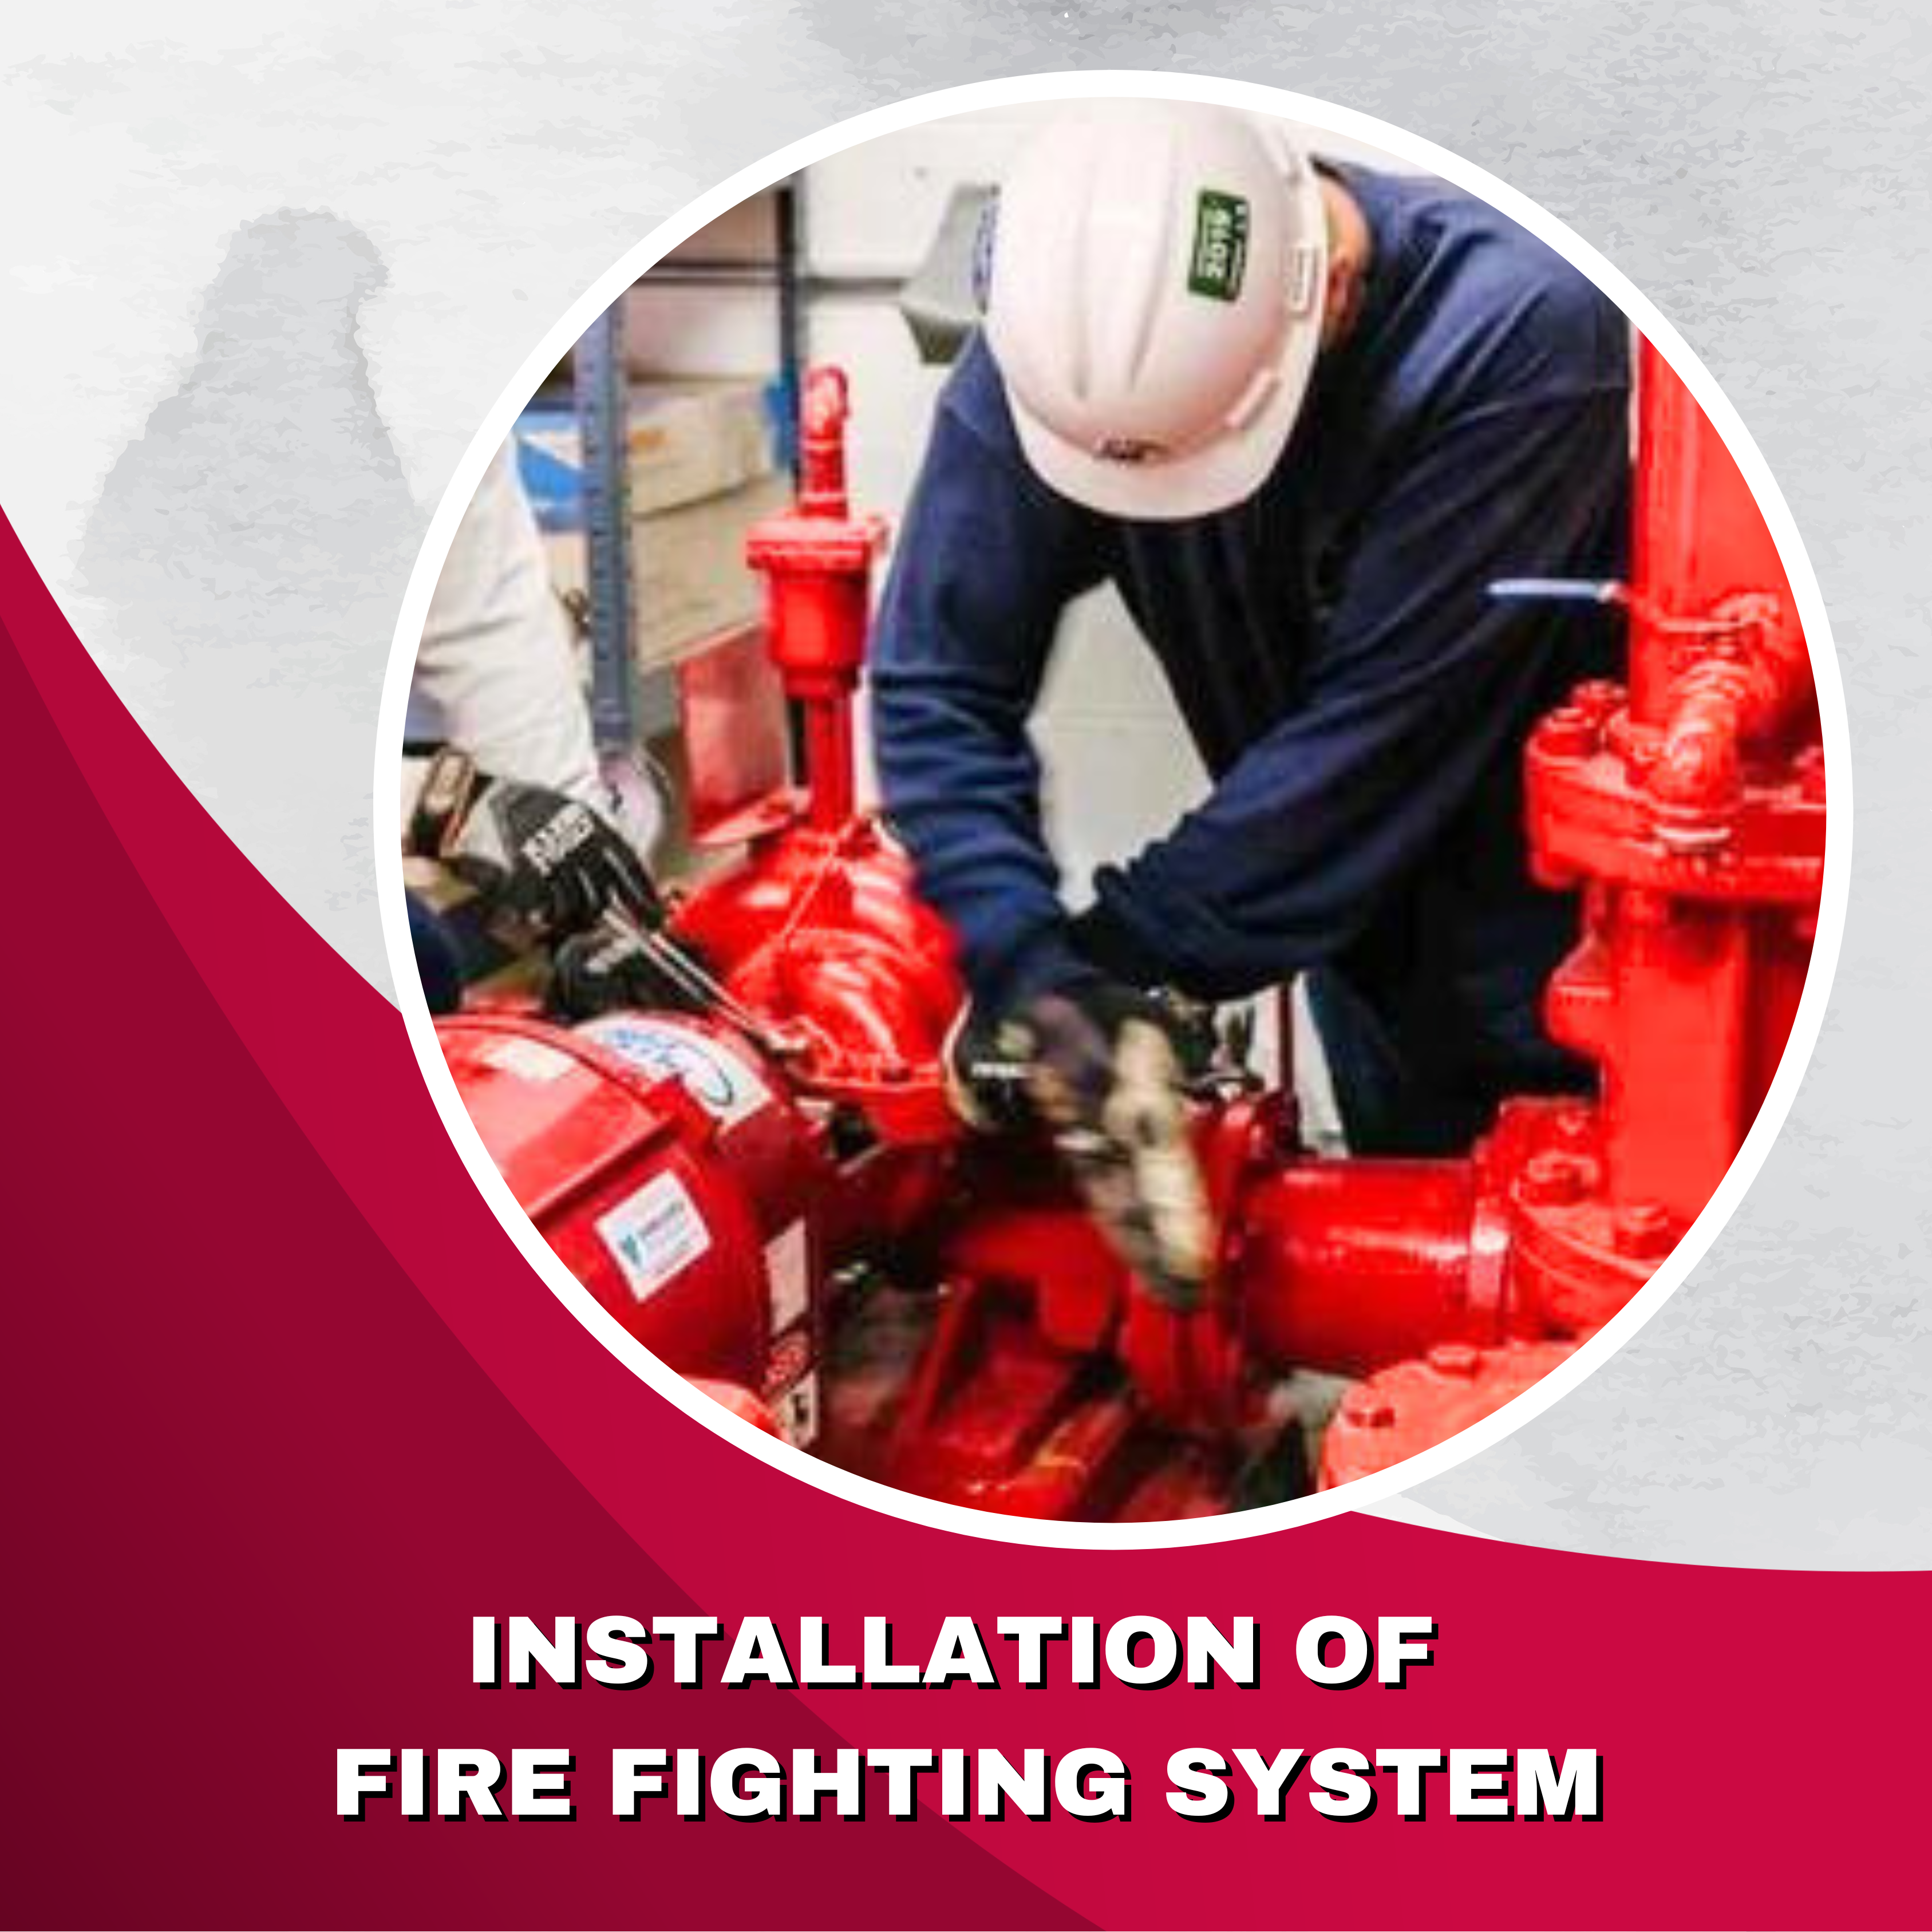 FIRE FIGHTING SYSTEM INSTALLATION - FIRE CHAMPS